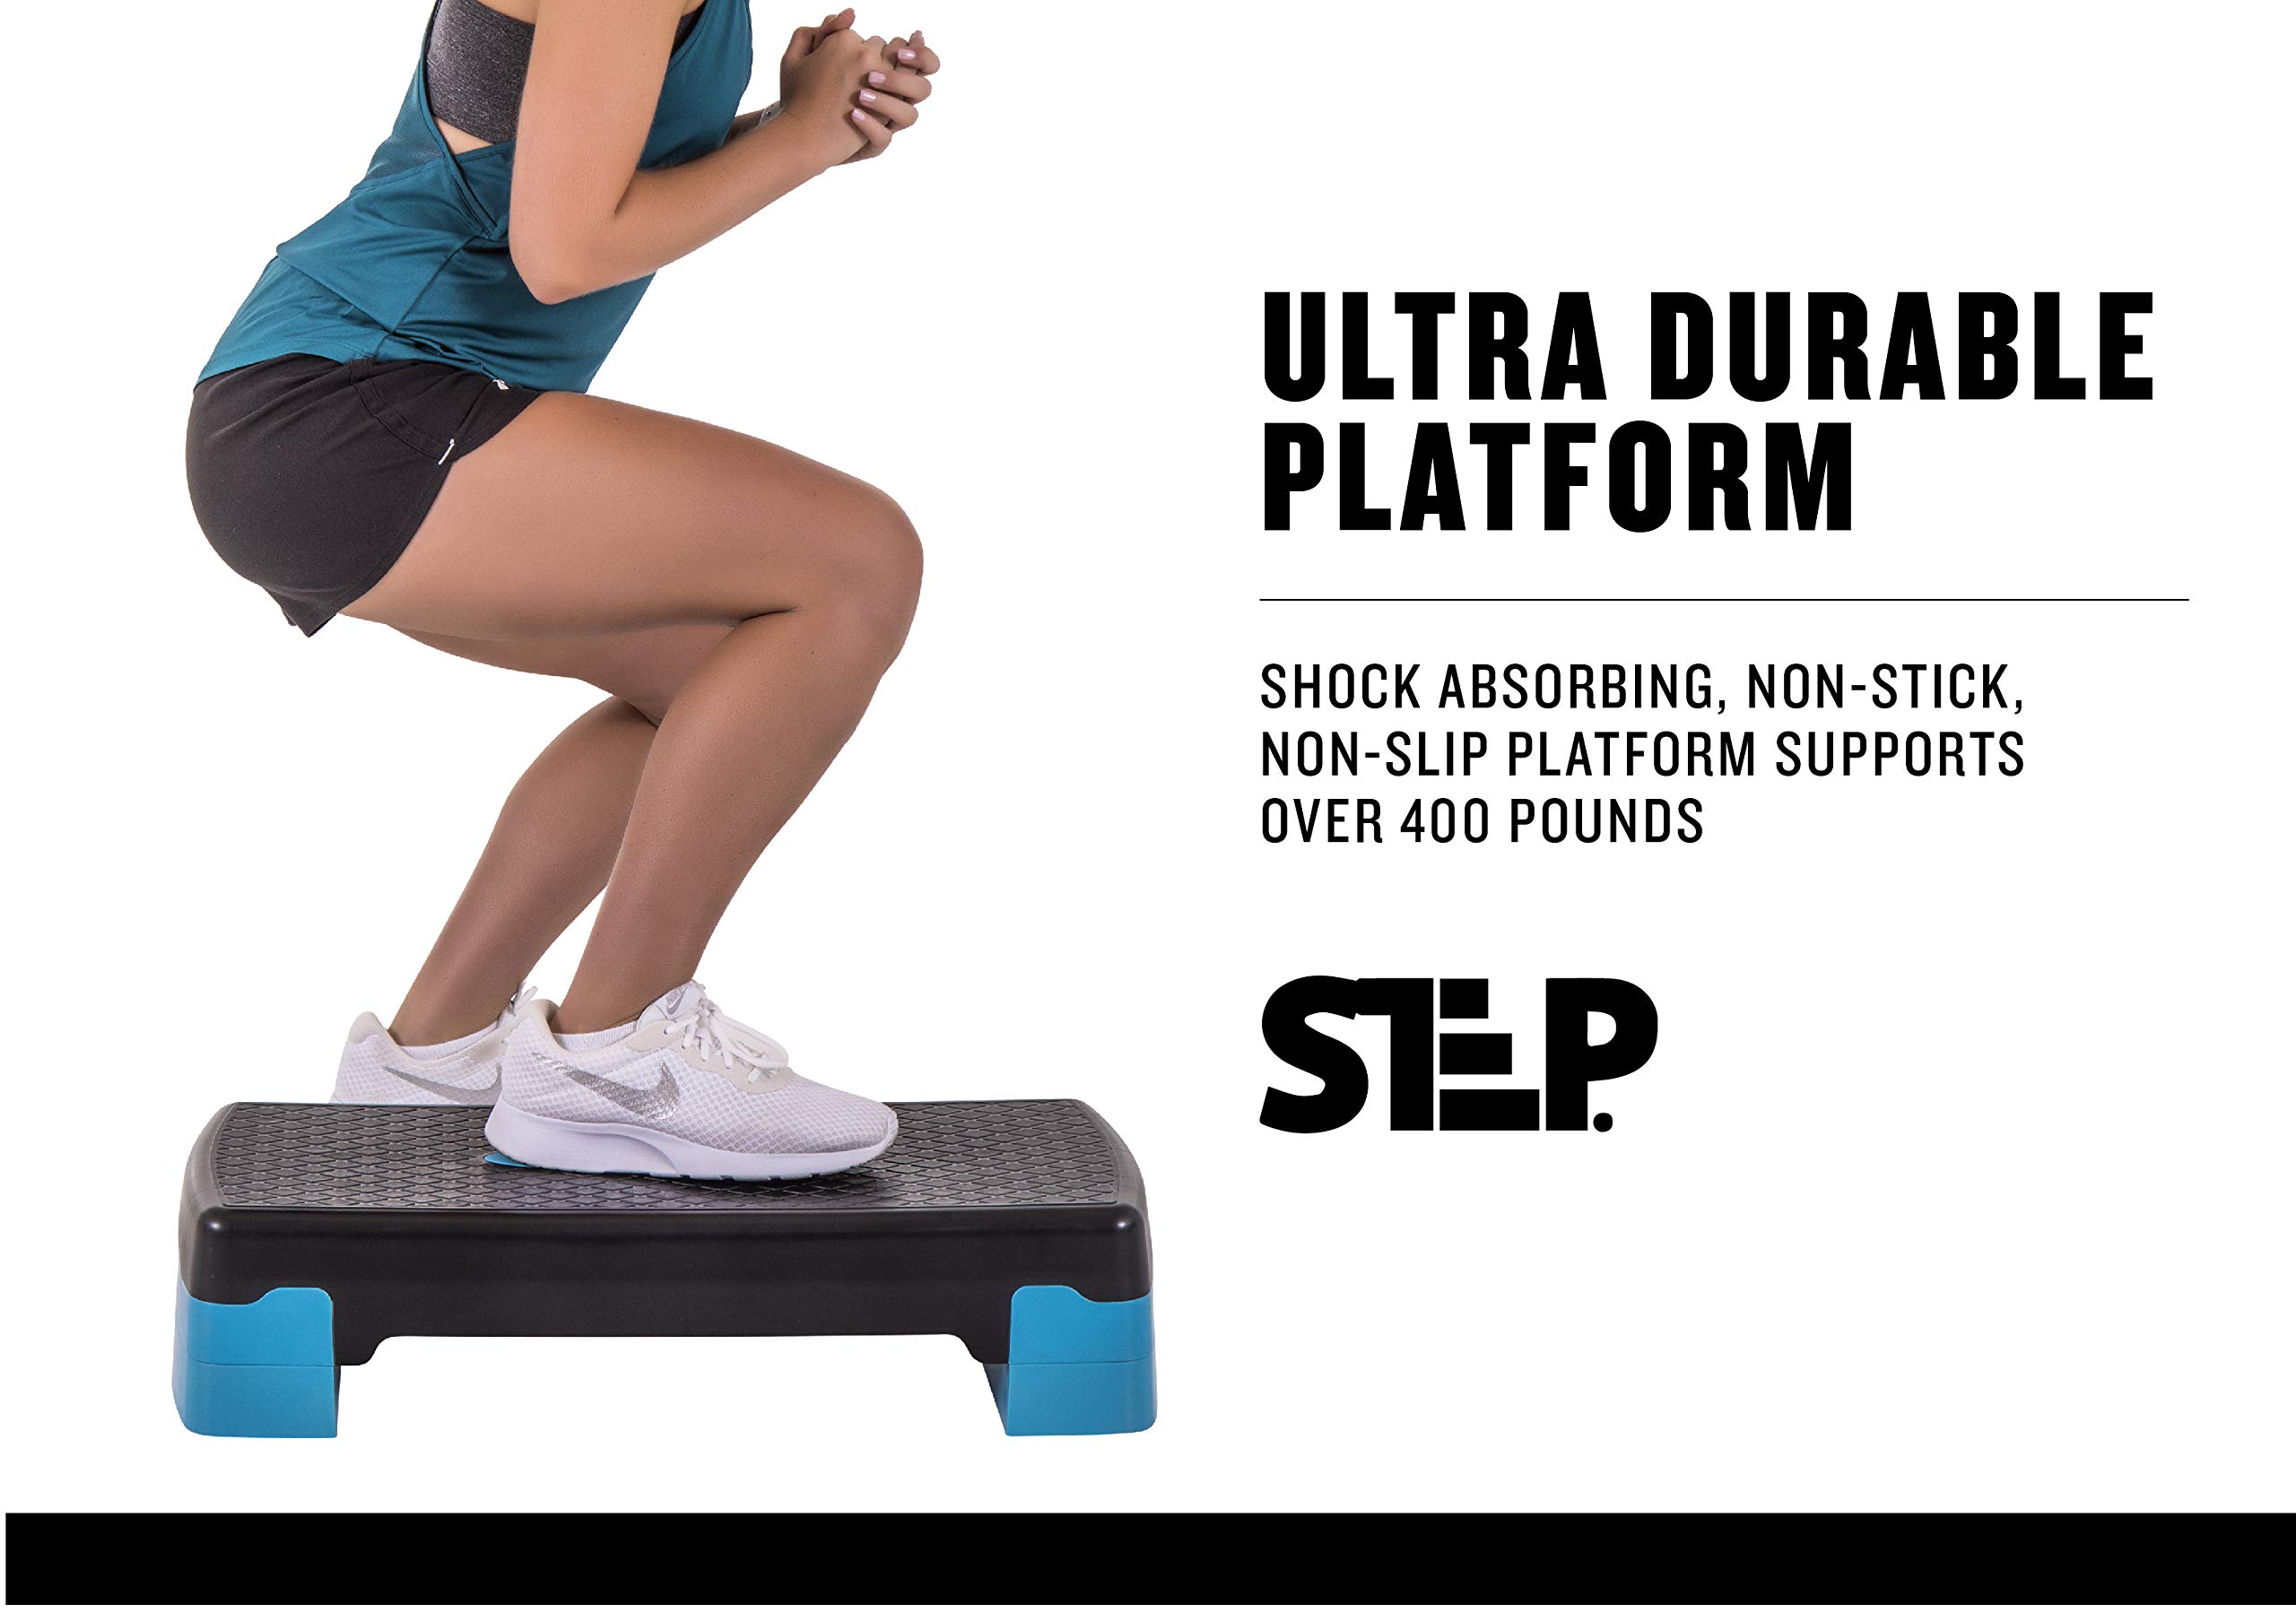 The Step Aerobic Platform for Home Workout, Aerobic Step Exercise Equipment for Exercise, Lightweight Adjustable Height Workout Equipment